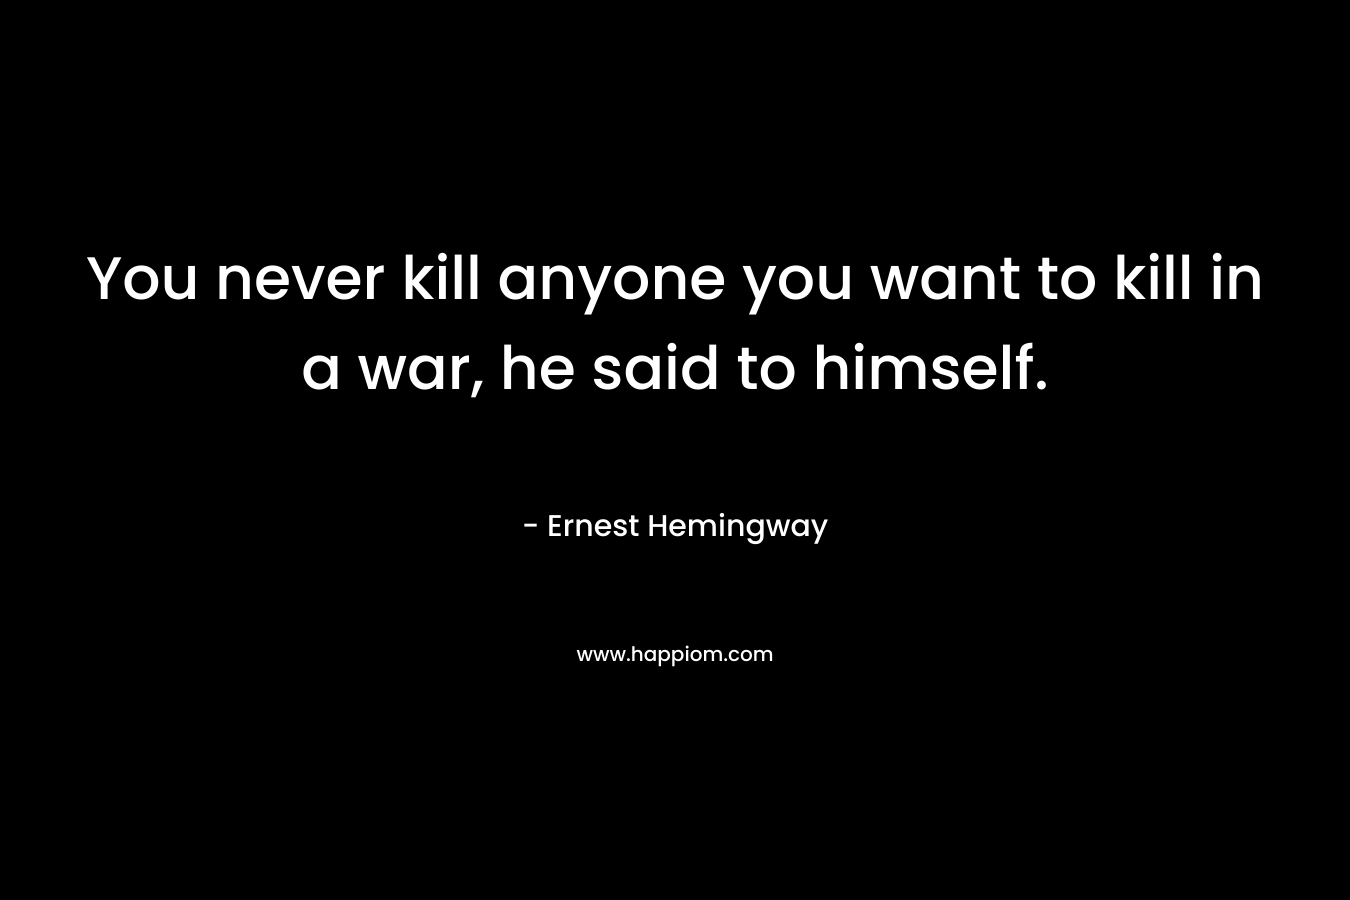 You never kill anyone you want to kill in a war, he said to himself.